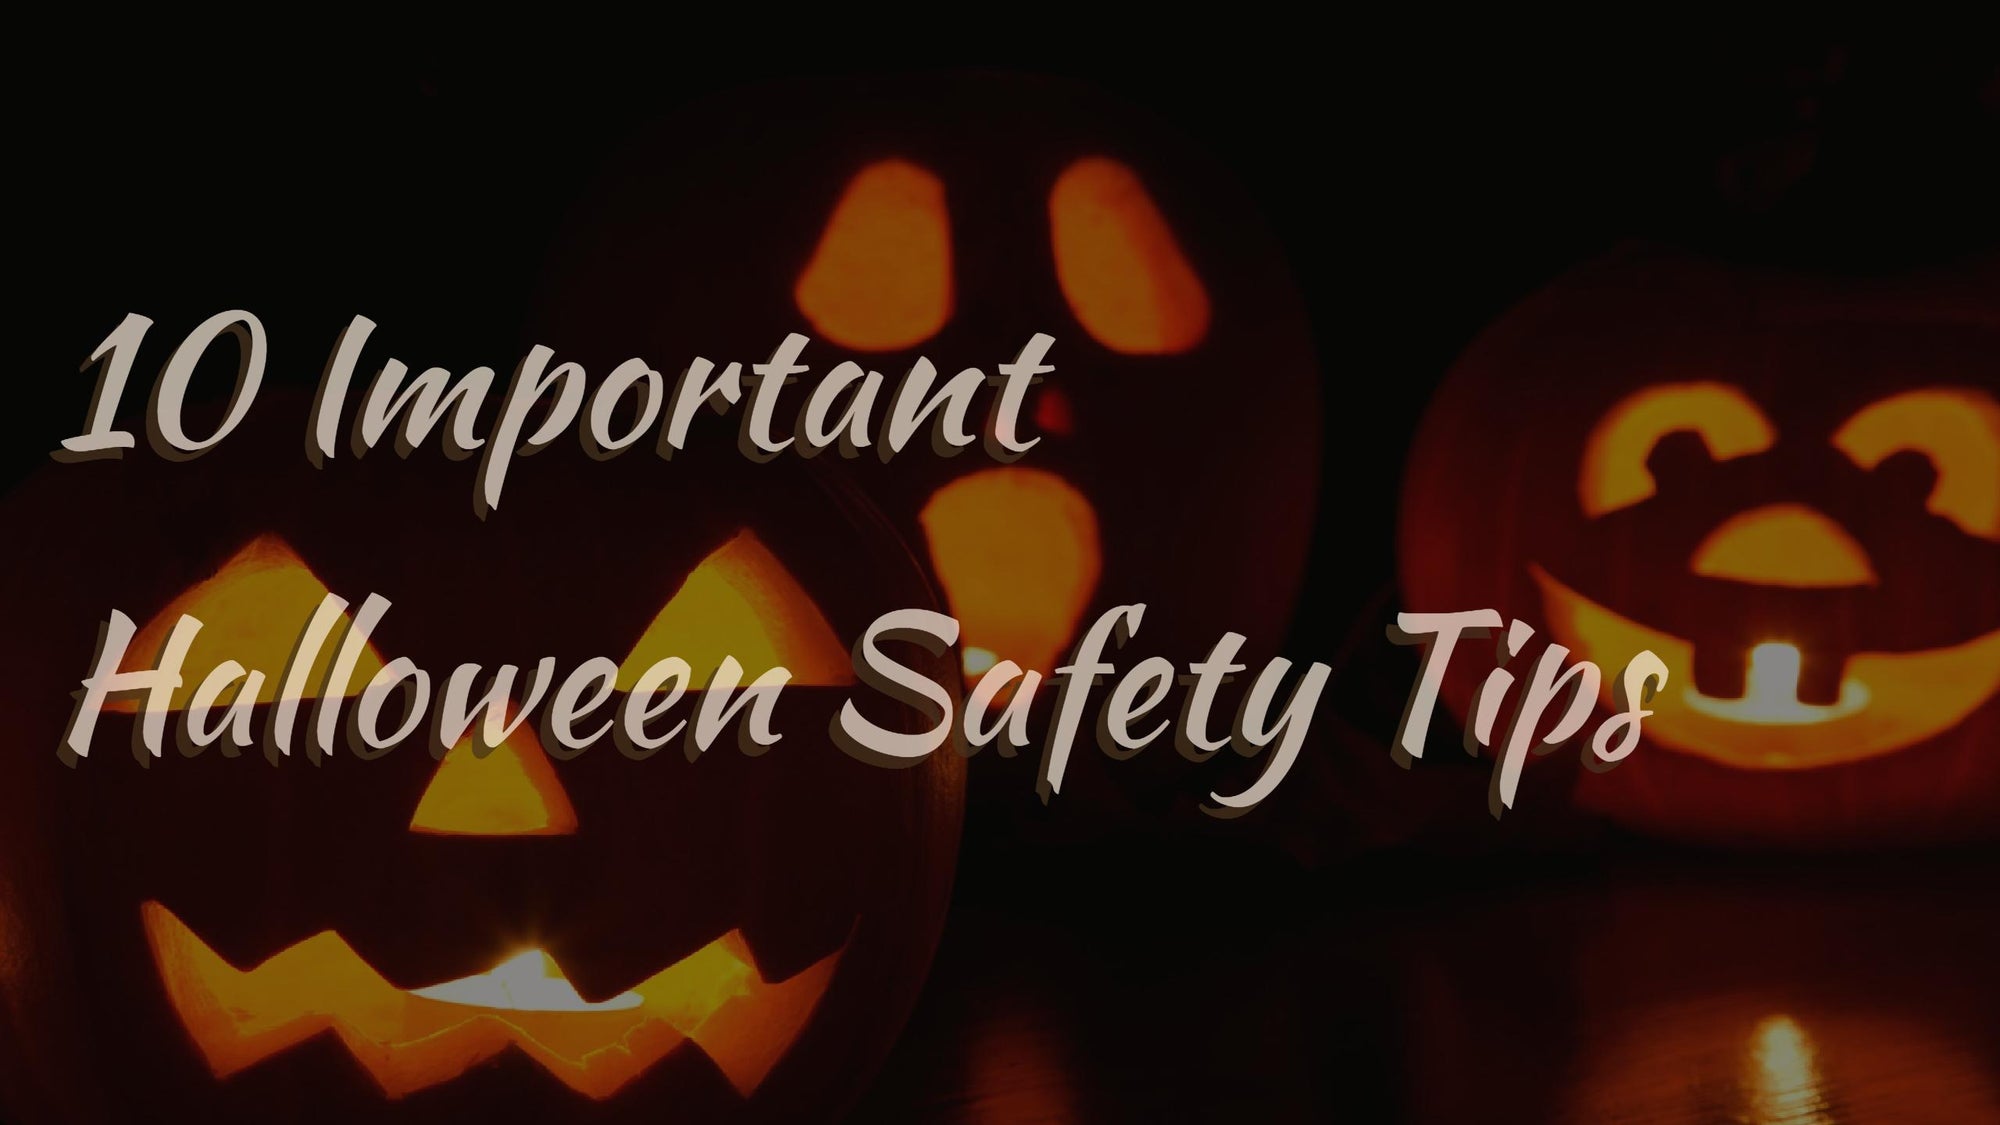 10 Important Halloween Safety Tips You Don't Want to Miss